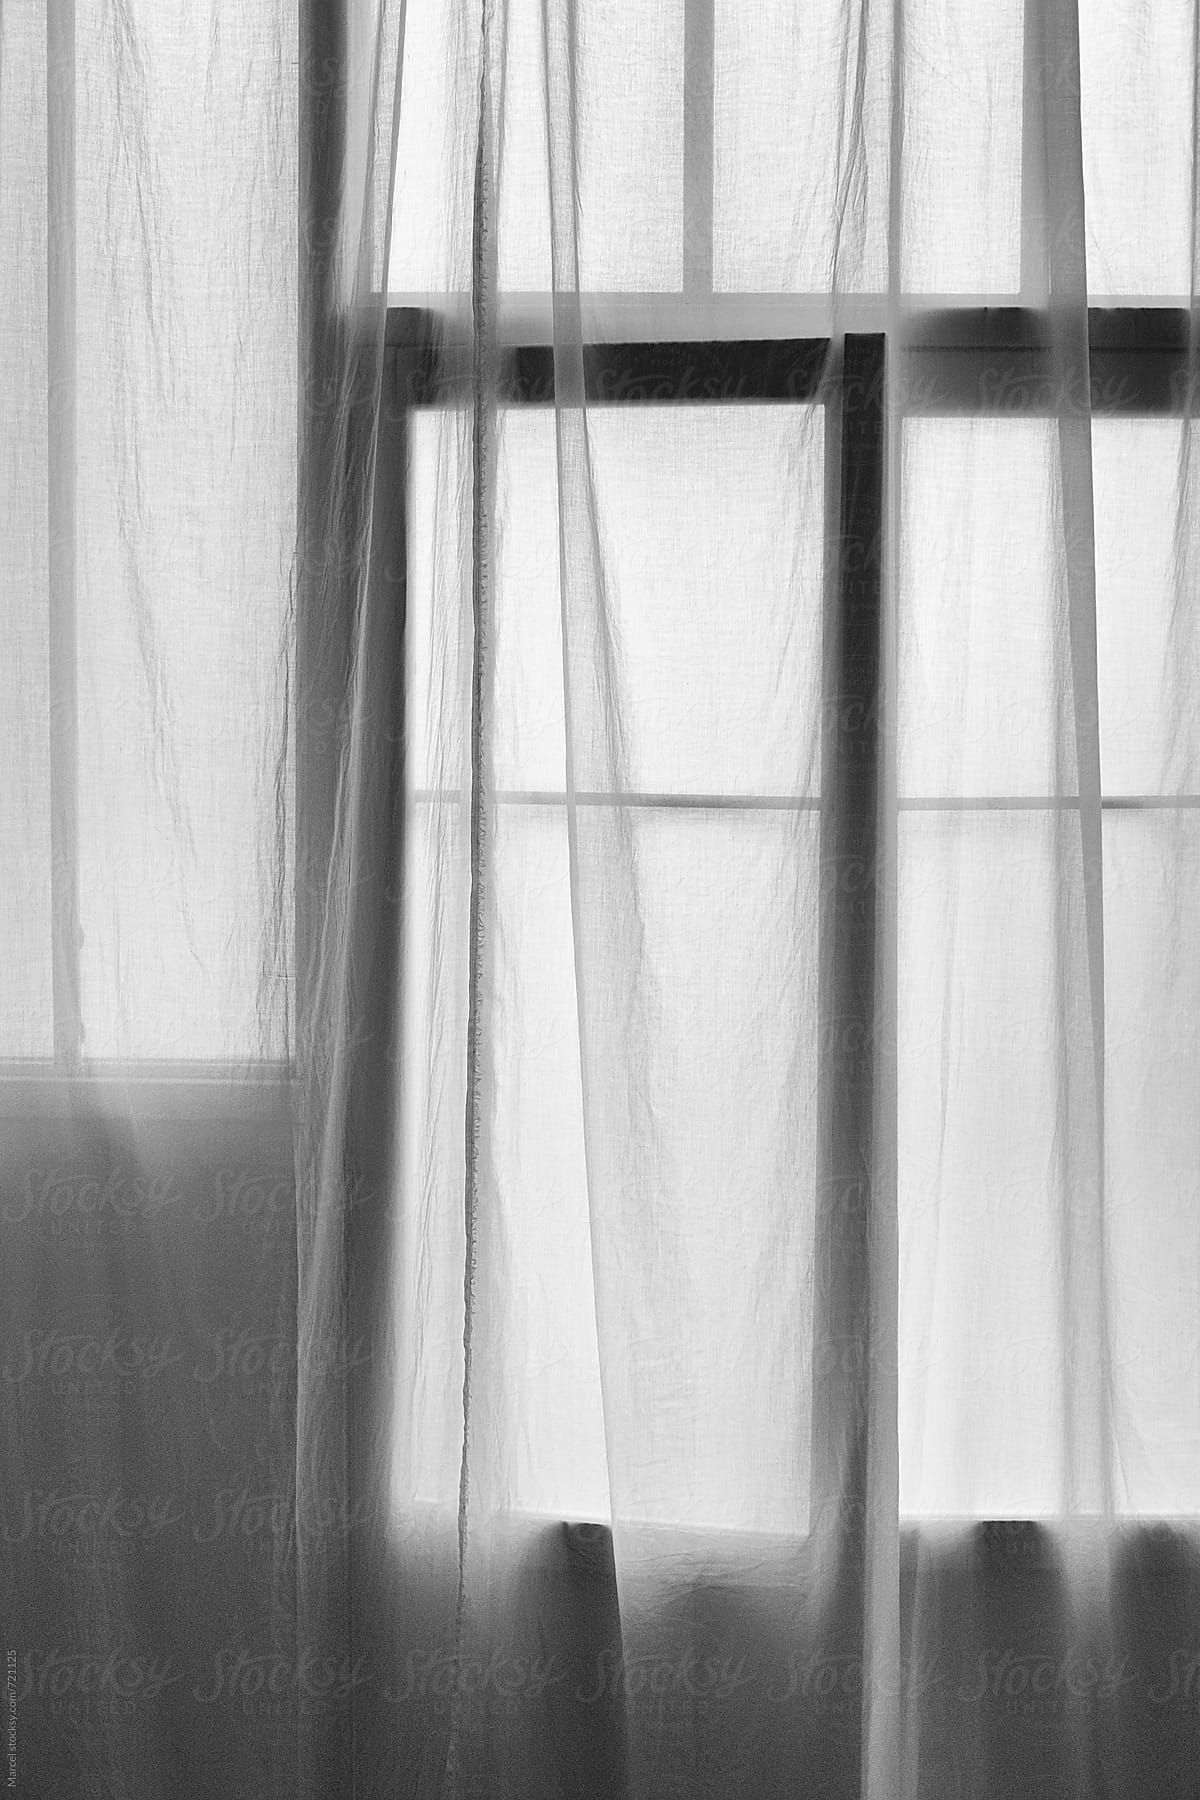 Black and white image of curtains and window